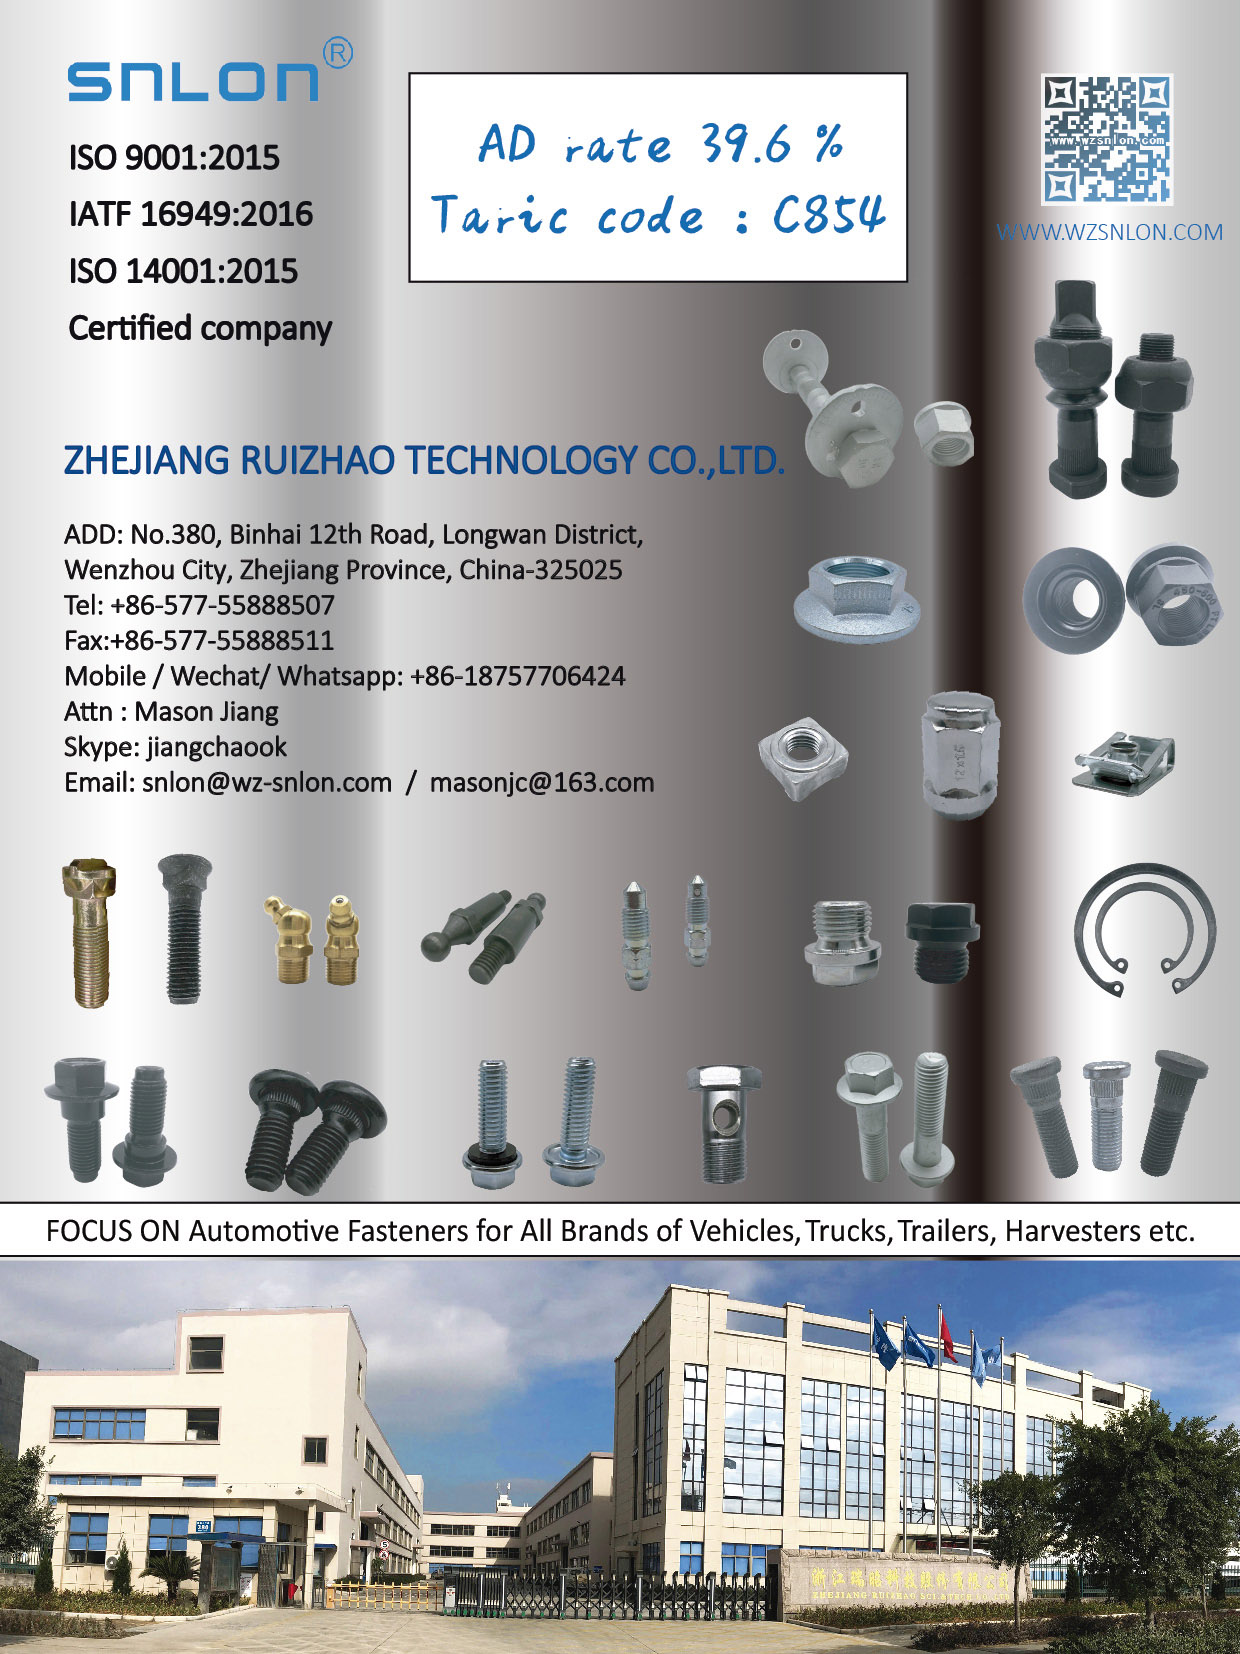 Zhejiang Ruizhao Technology Co., Ltd. , Nuts, Screws, Stamping Parts & Special Parts,Hex nut,thin nut, heavy nut, cap nut, cage nut, weld nut,wheel nut,flange nut,castle nut,round nut,stainless steel nut, rivet nut, square nut etc.